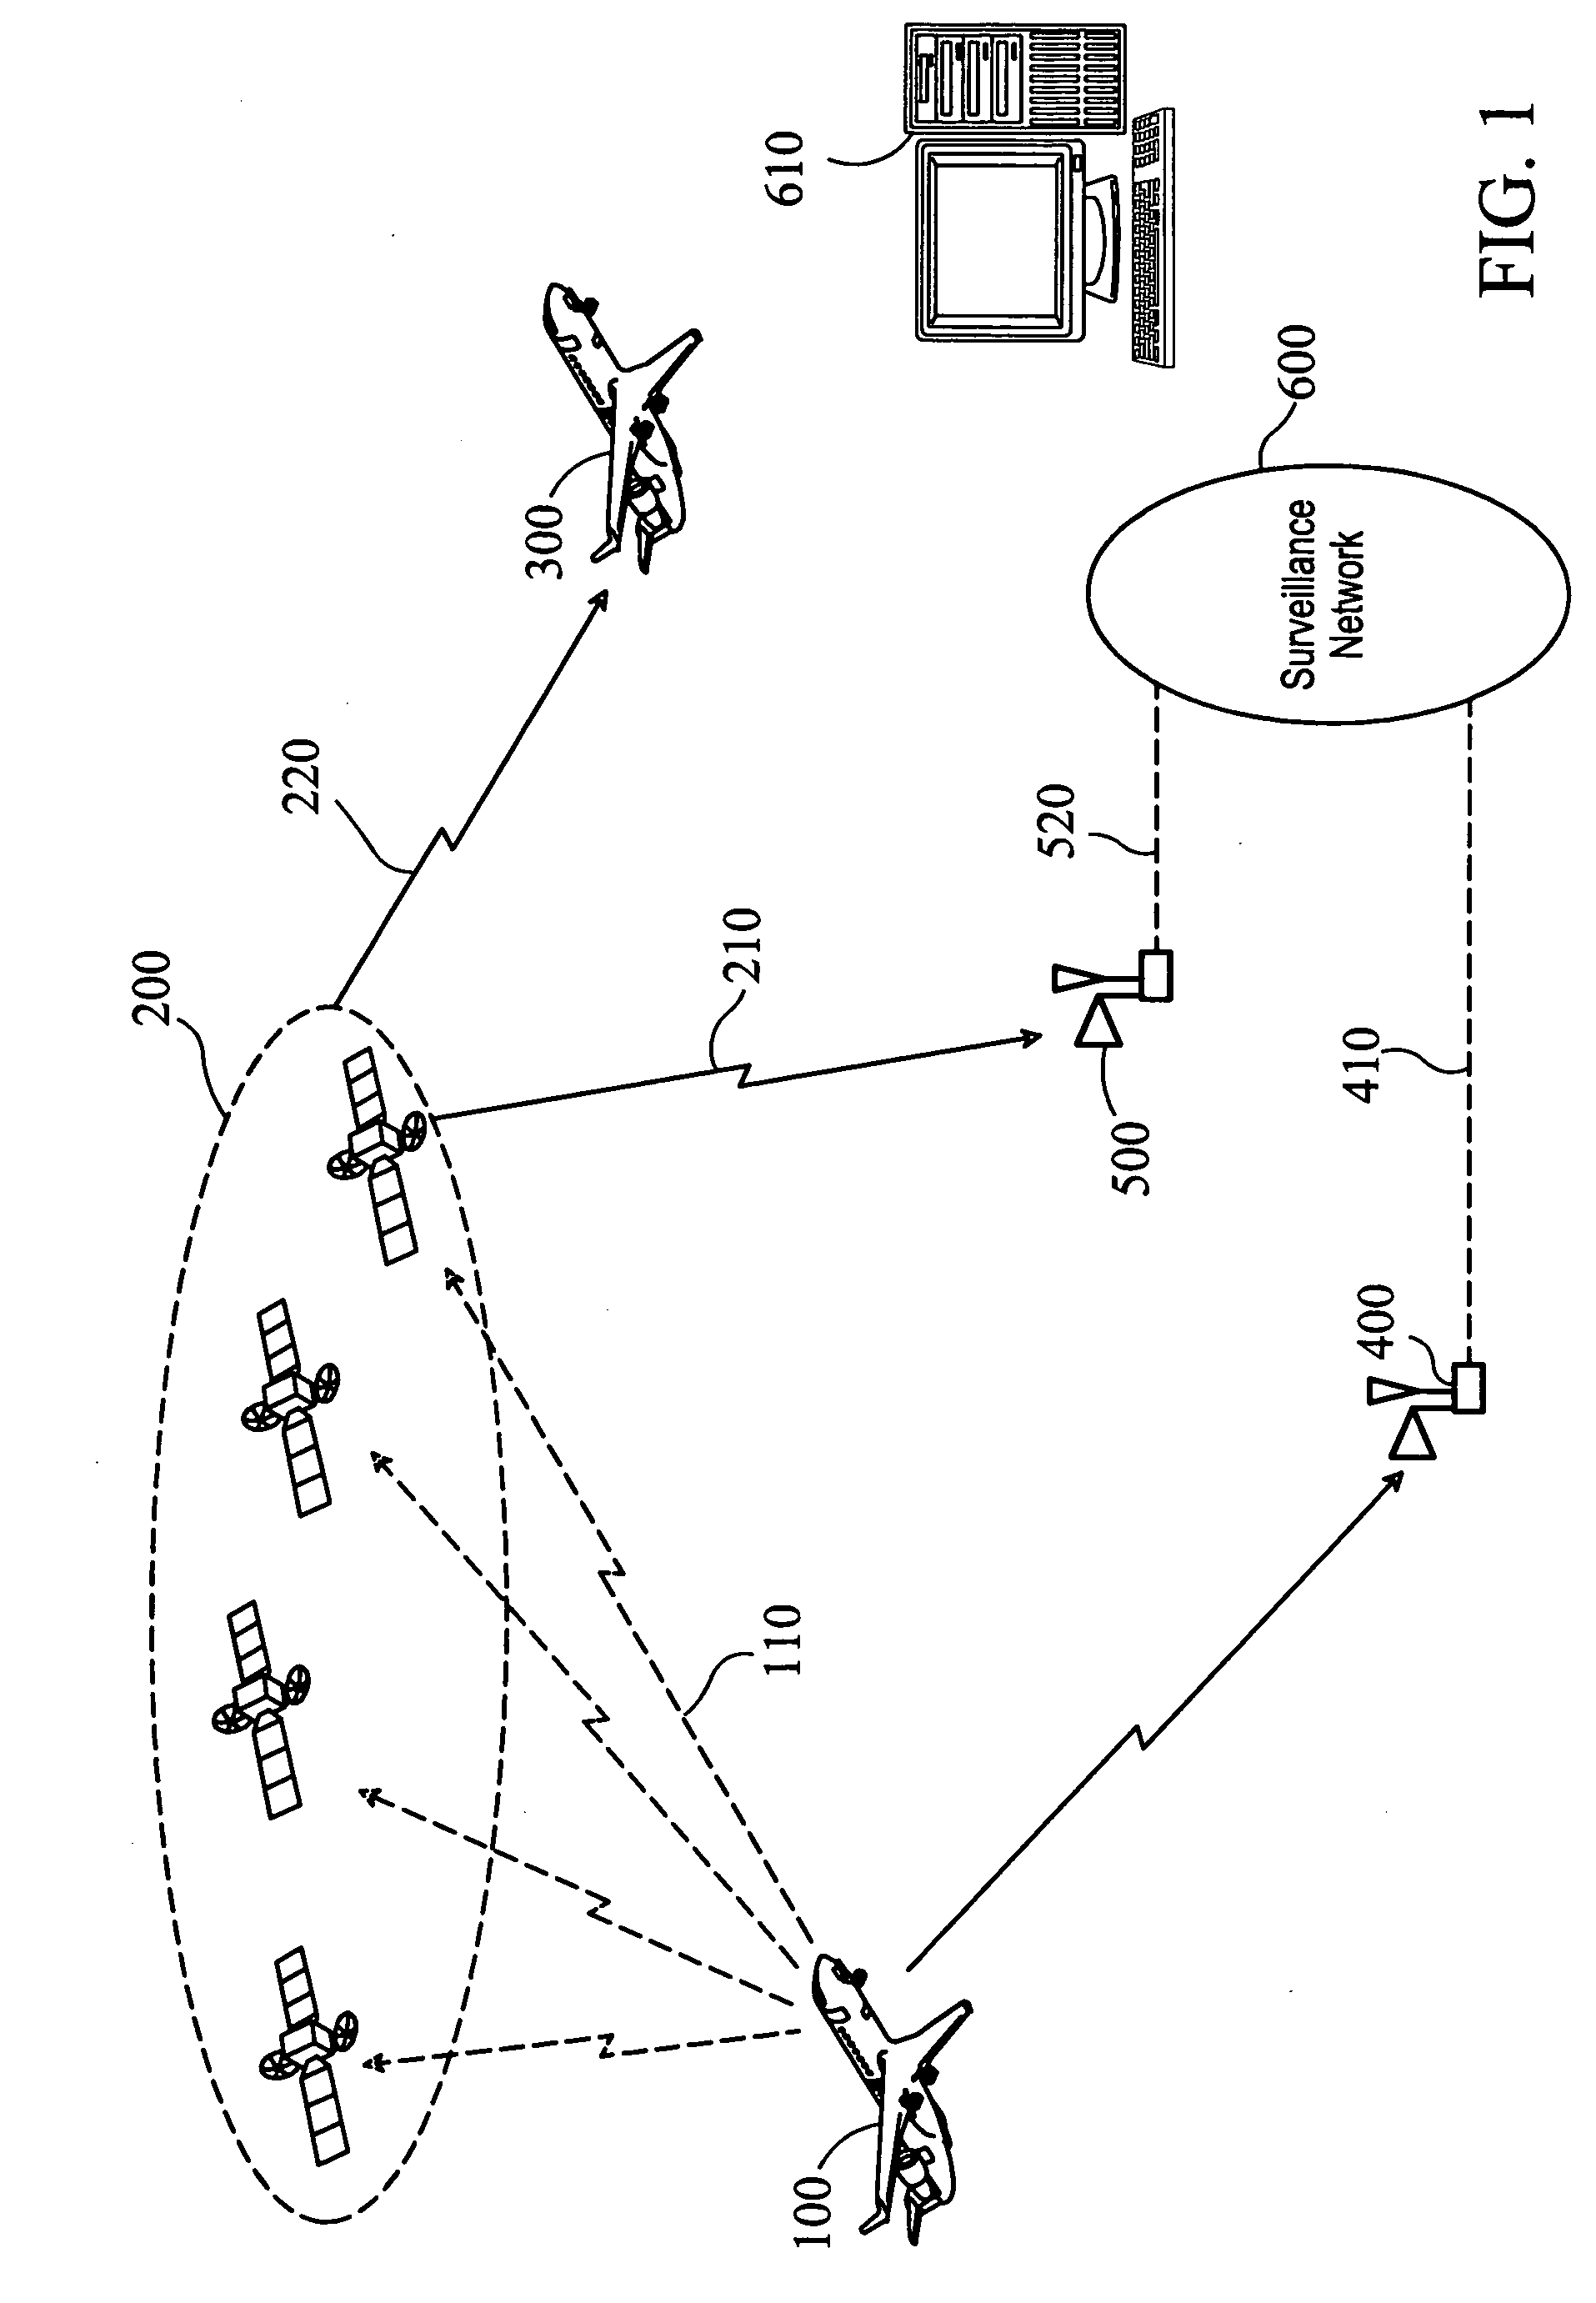 Method and apparatus for ADS-B validation, active and passive multilateration, and elliptical surviellance